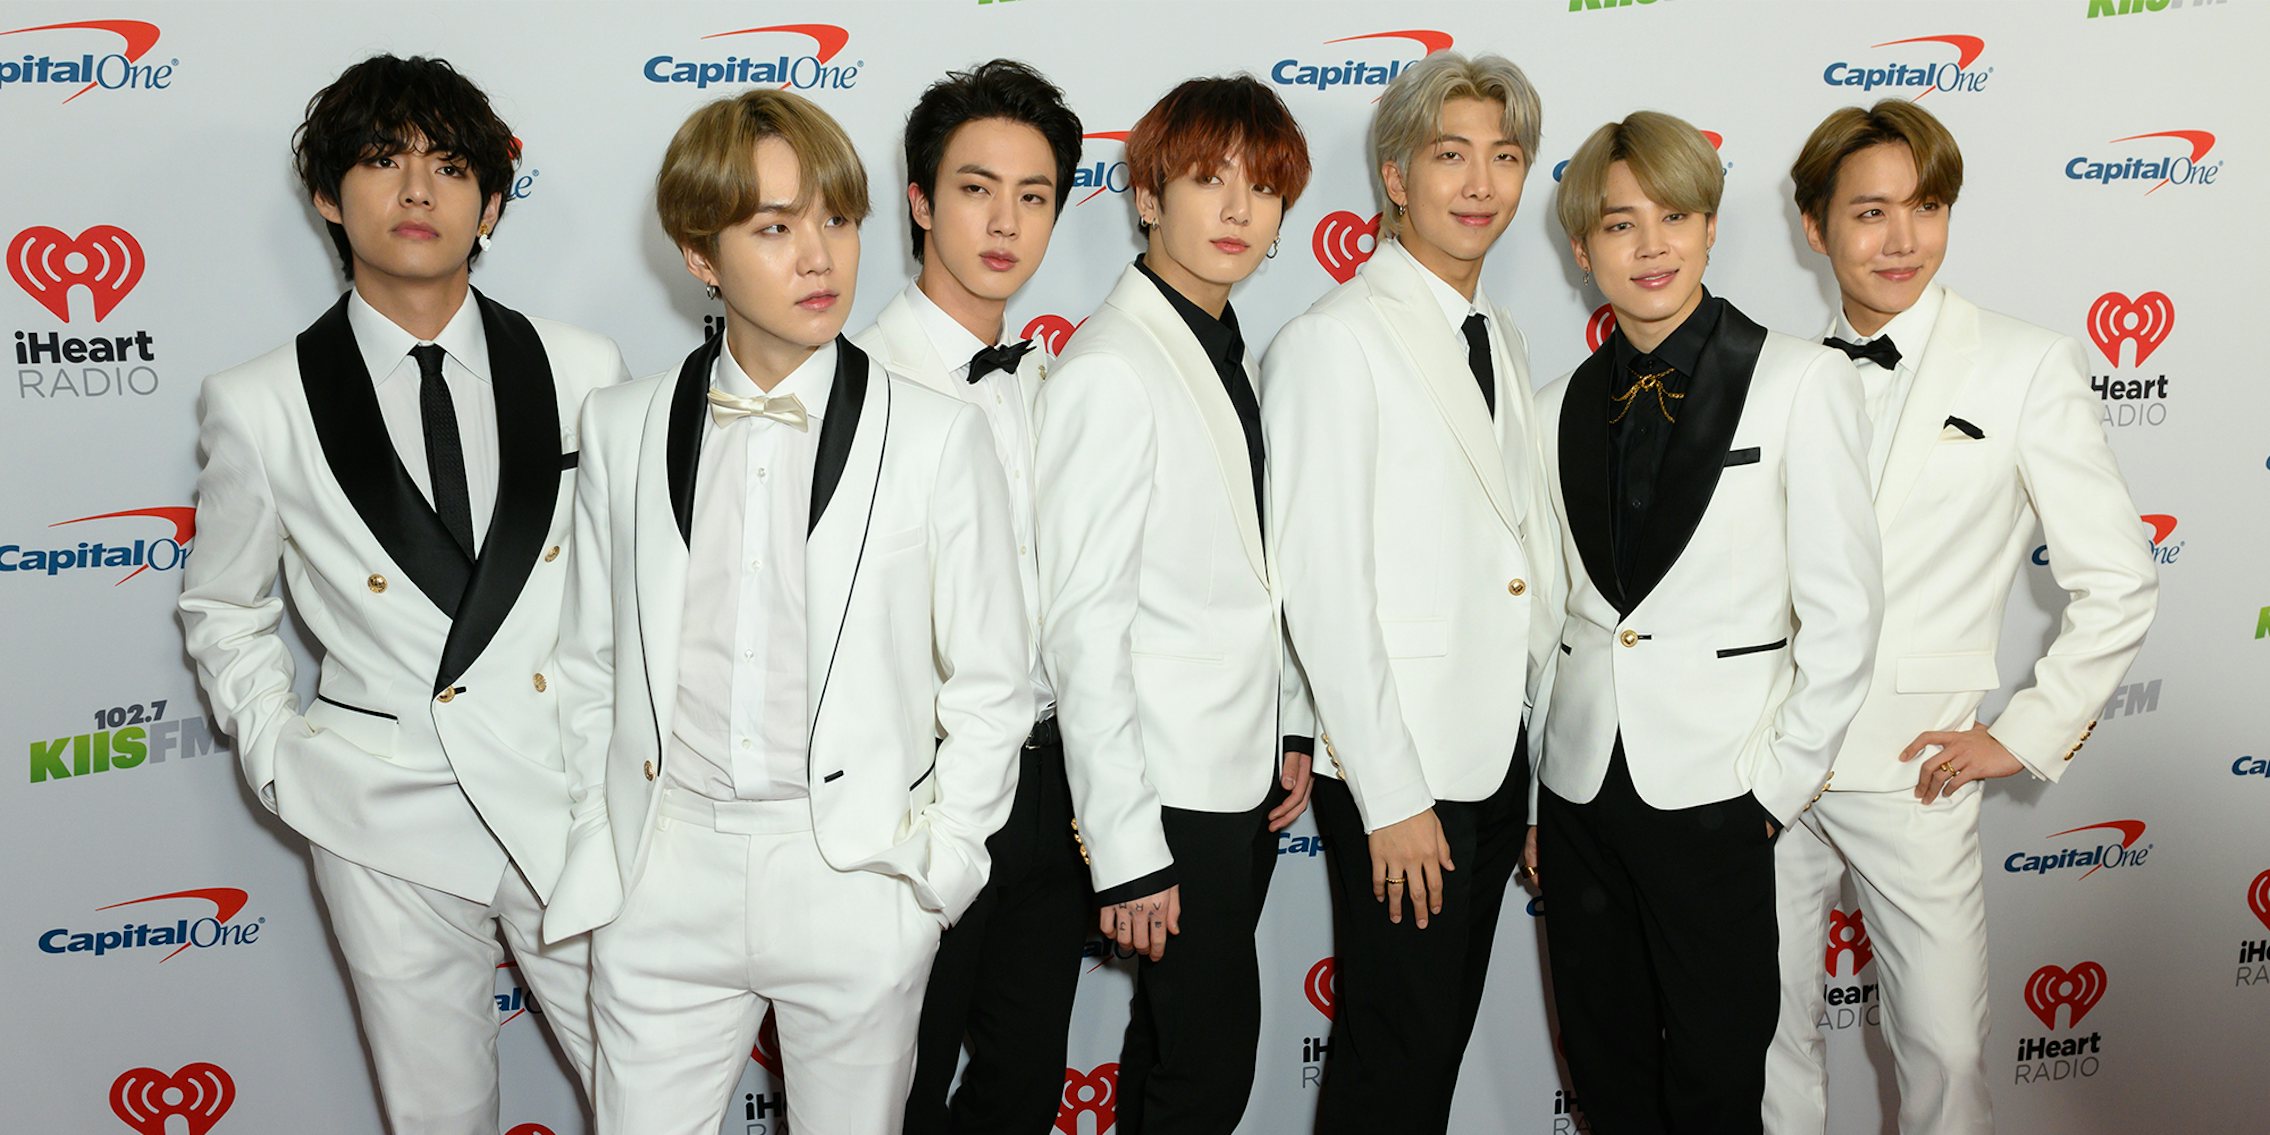 BTS Absolutely Dominated The Grammys On Twitter